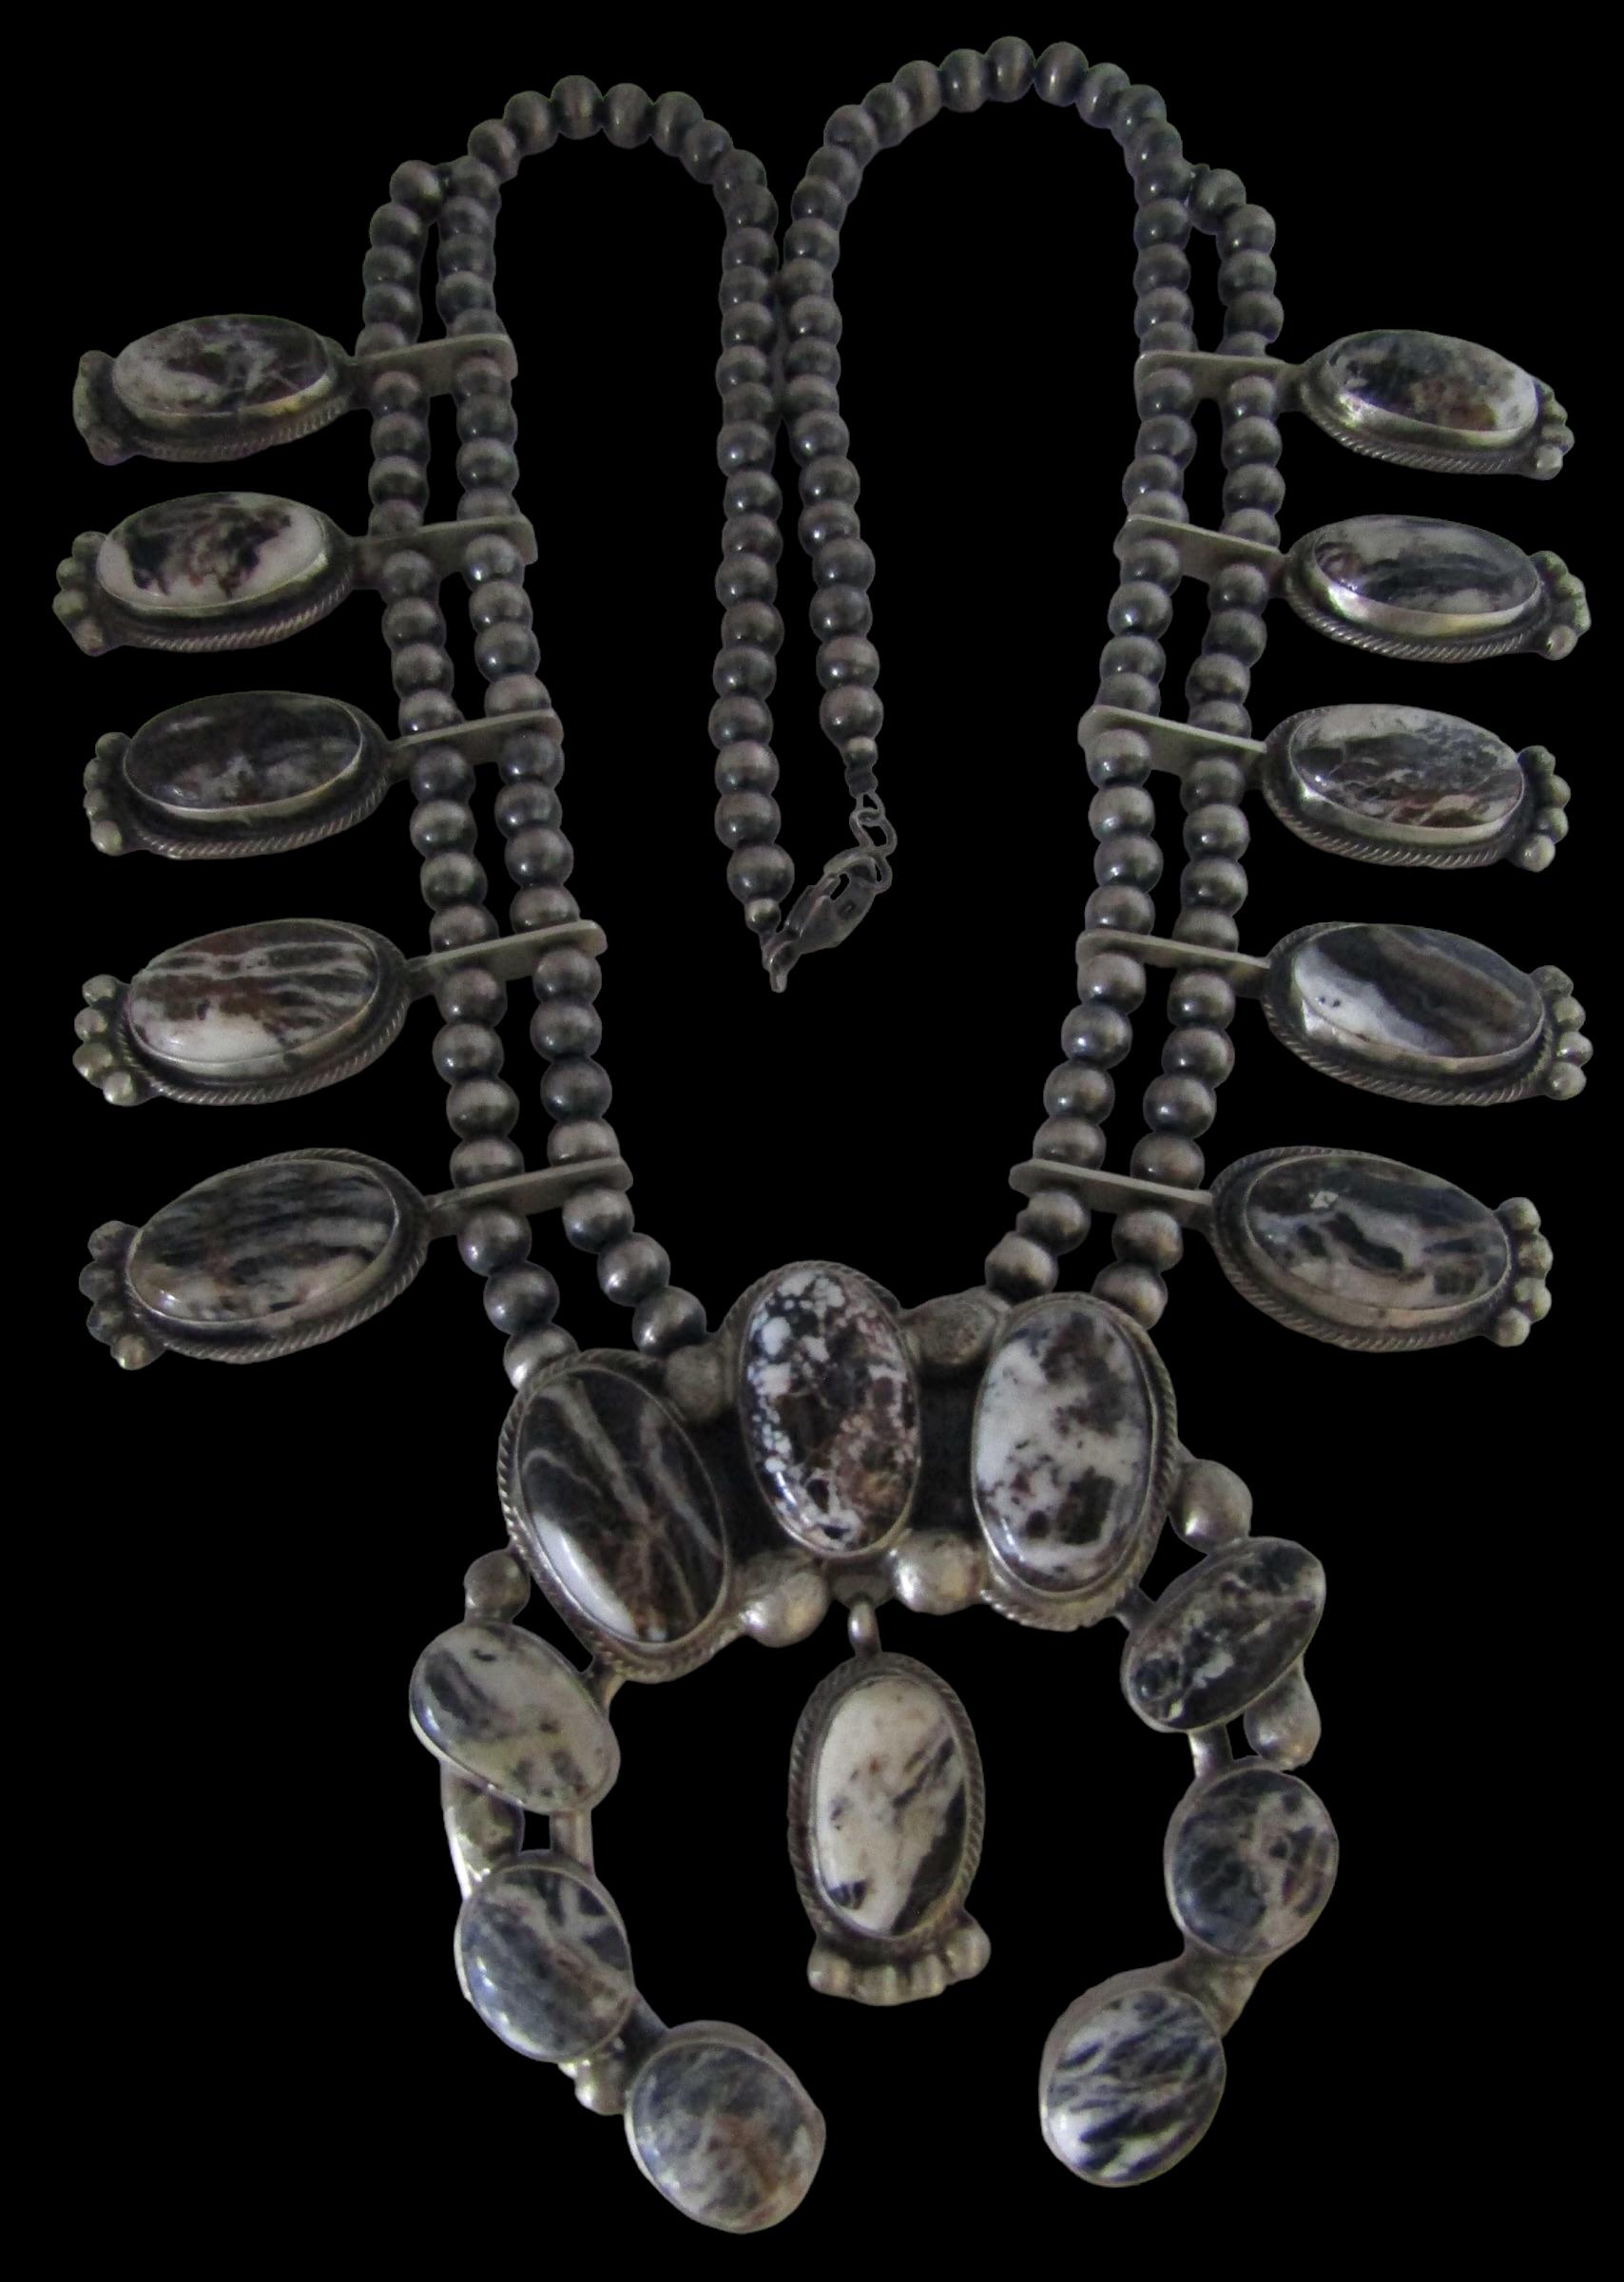 This Navajo Wild Horse, White Buffalo and Sterling Silver Squash Blossom necklace, signed by Native American Victor Hicks, is one of a kind and highly desirable. This brilliant silversmith has been creating beautiful artisan pieces for nearly 40